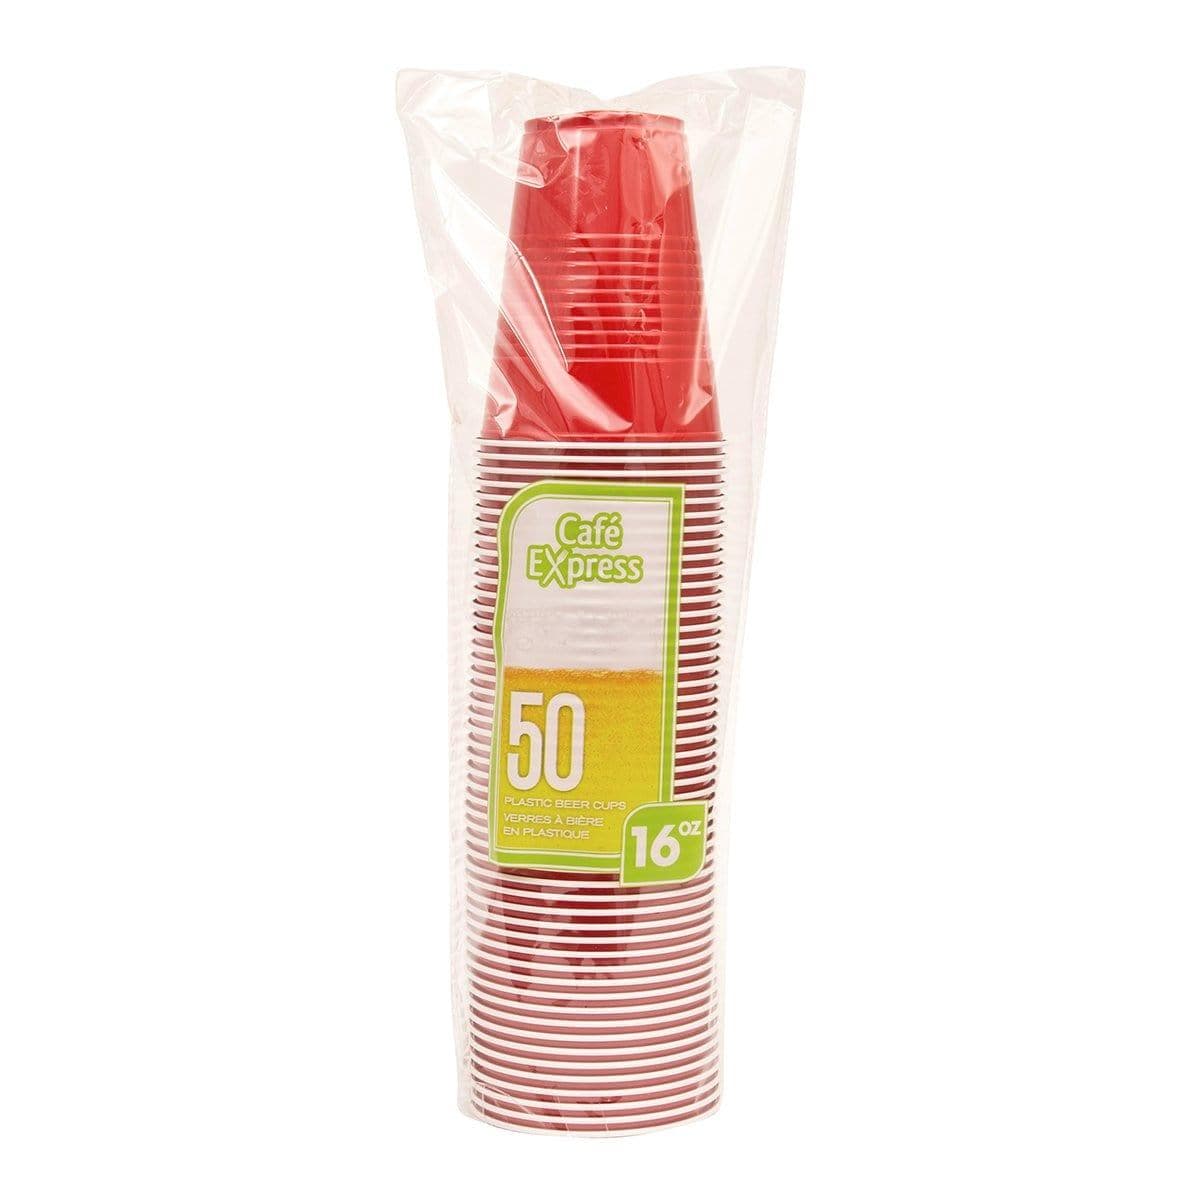 Buy Plasticware Plastic Cups 50/pkg - Red sold at Party Expert